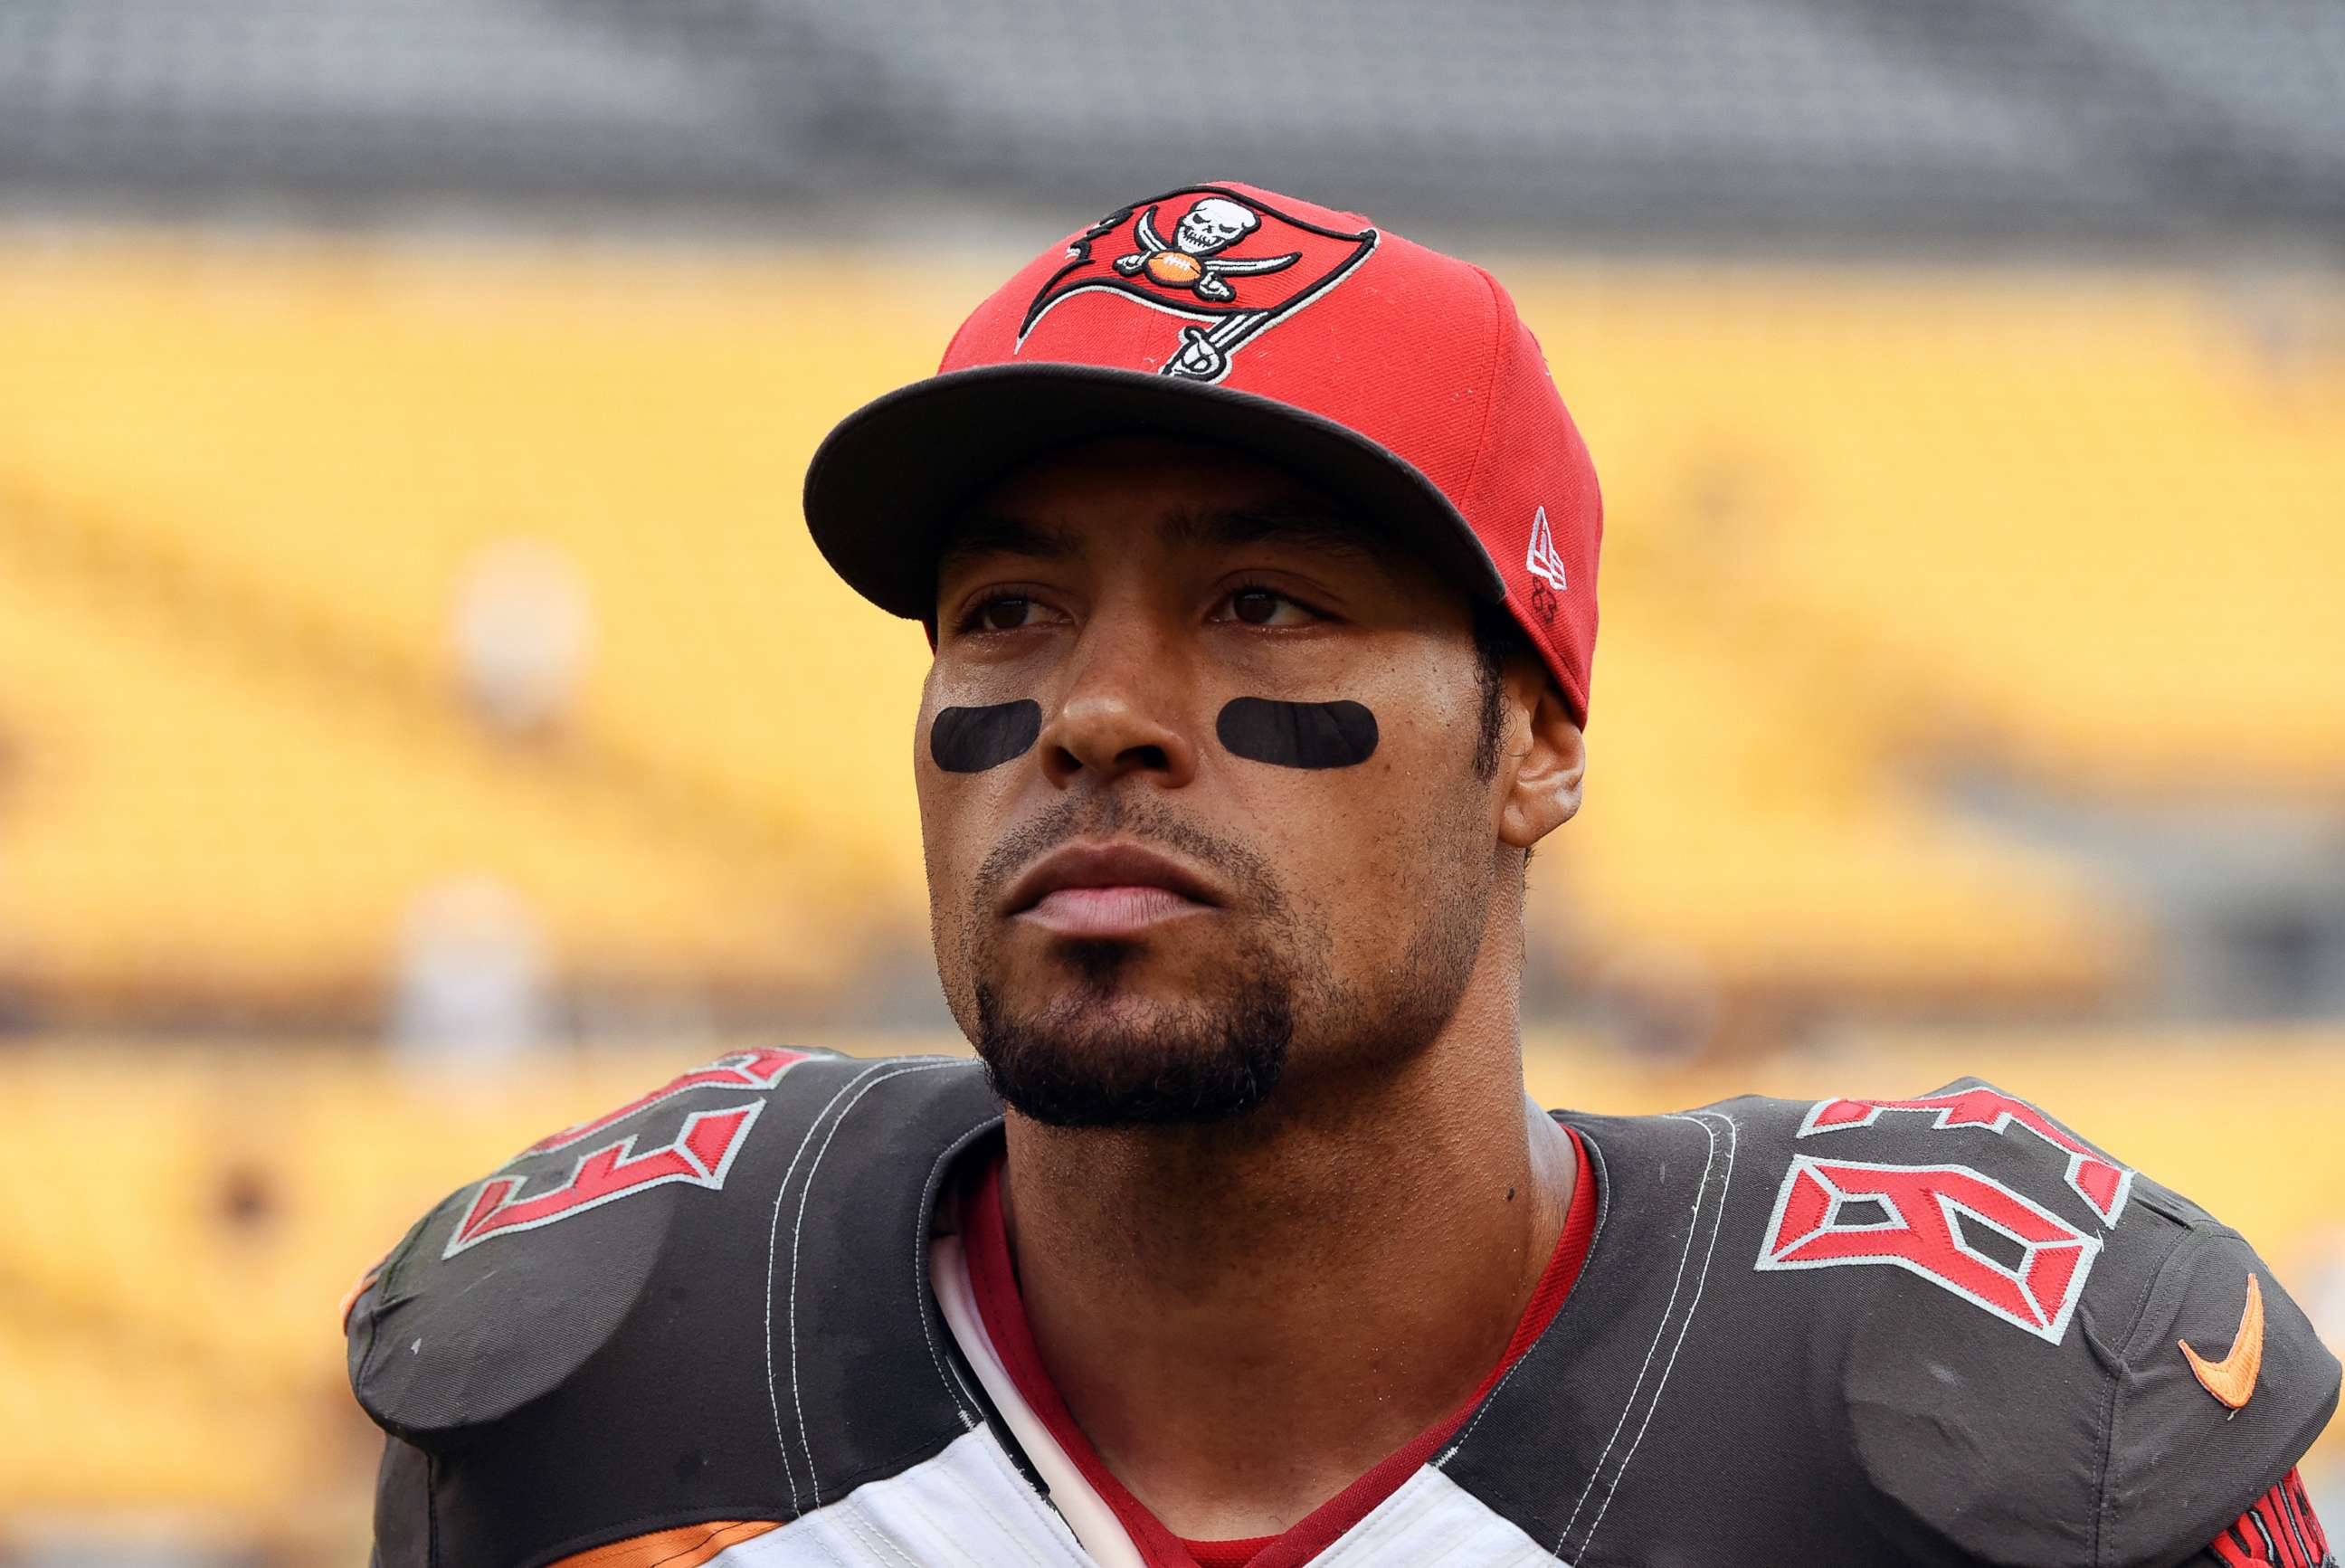 PHOTO: Wide receiver Vincent Jackson of the Tampa Bay Buccaneers looks on from the field at Heinz Field on Sept. 28, 2014, in Pittsburgh, Penn.